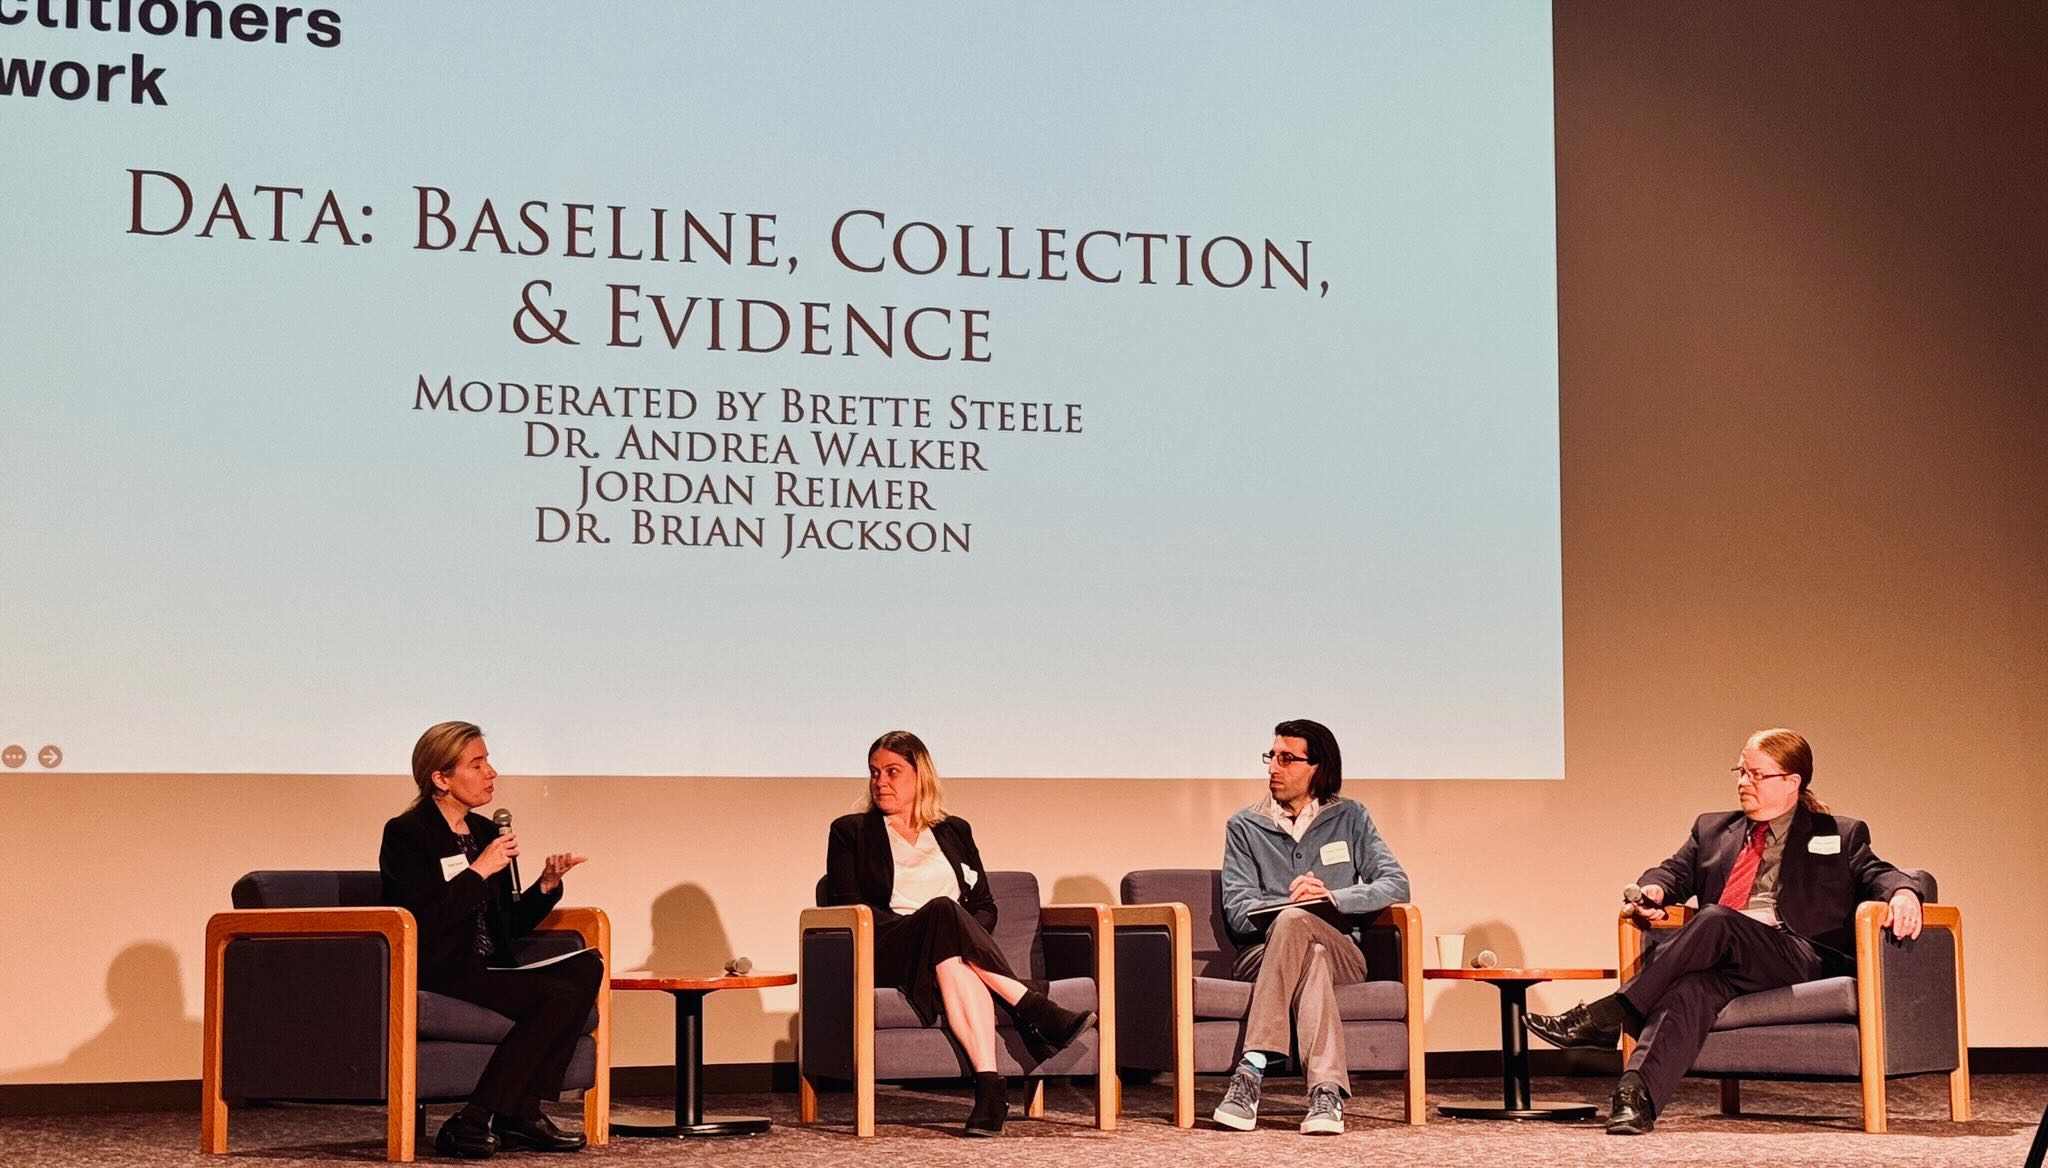 Andrea Walker sits on a stage with three people including a moderator and two other panelists. In the background is a Power Point presentation saying "Data: Baseline, Collection, & Evidence."